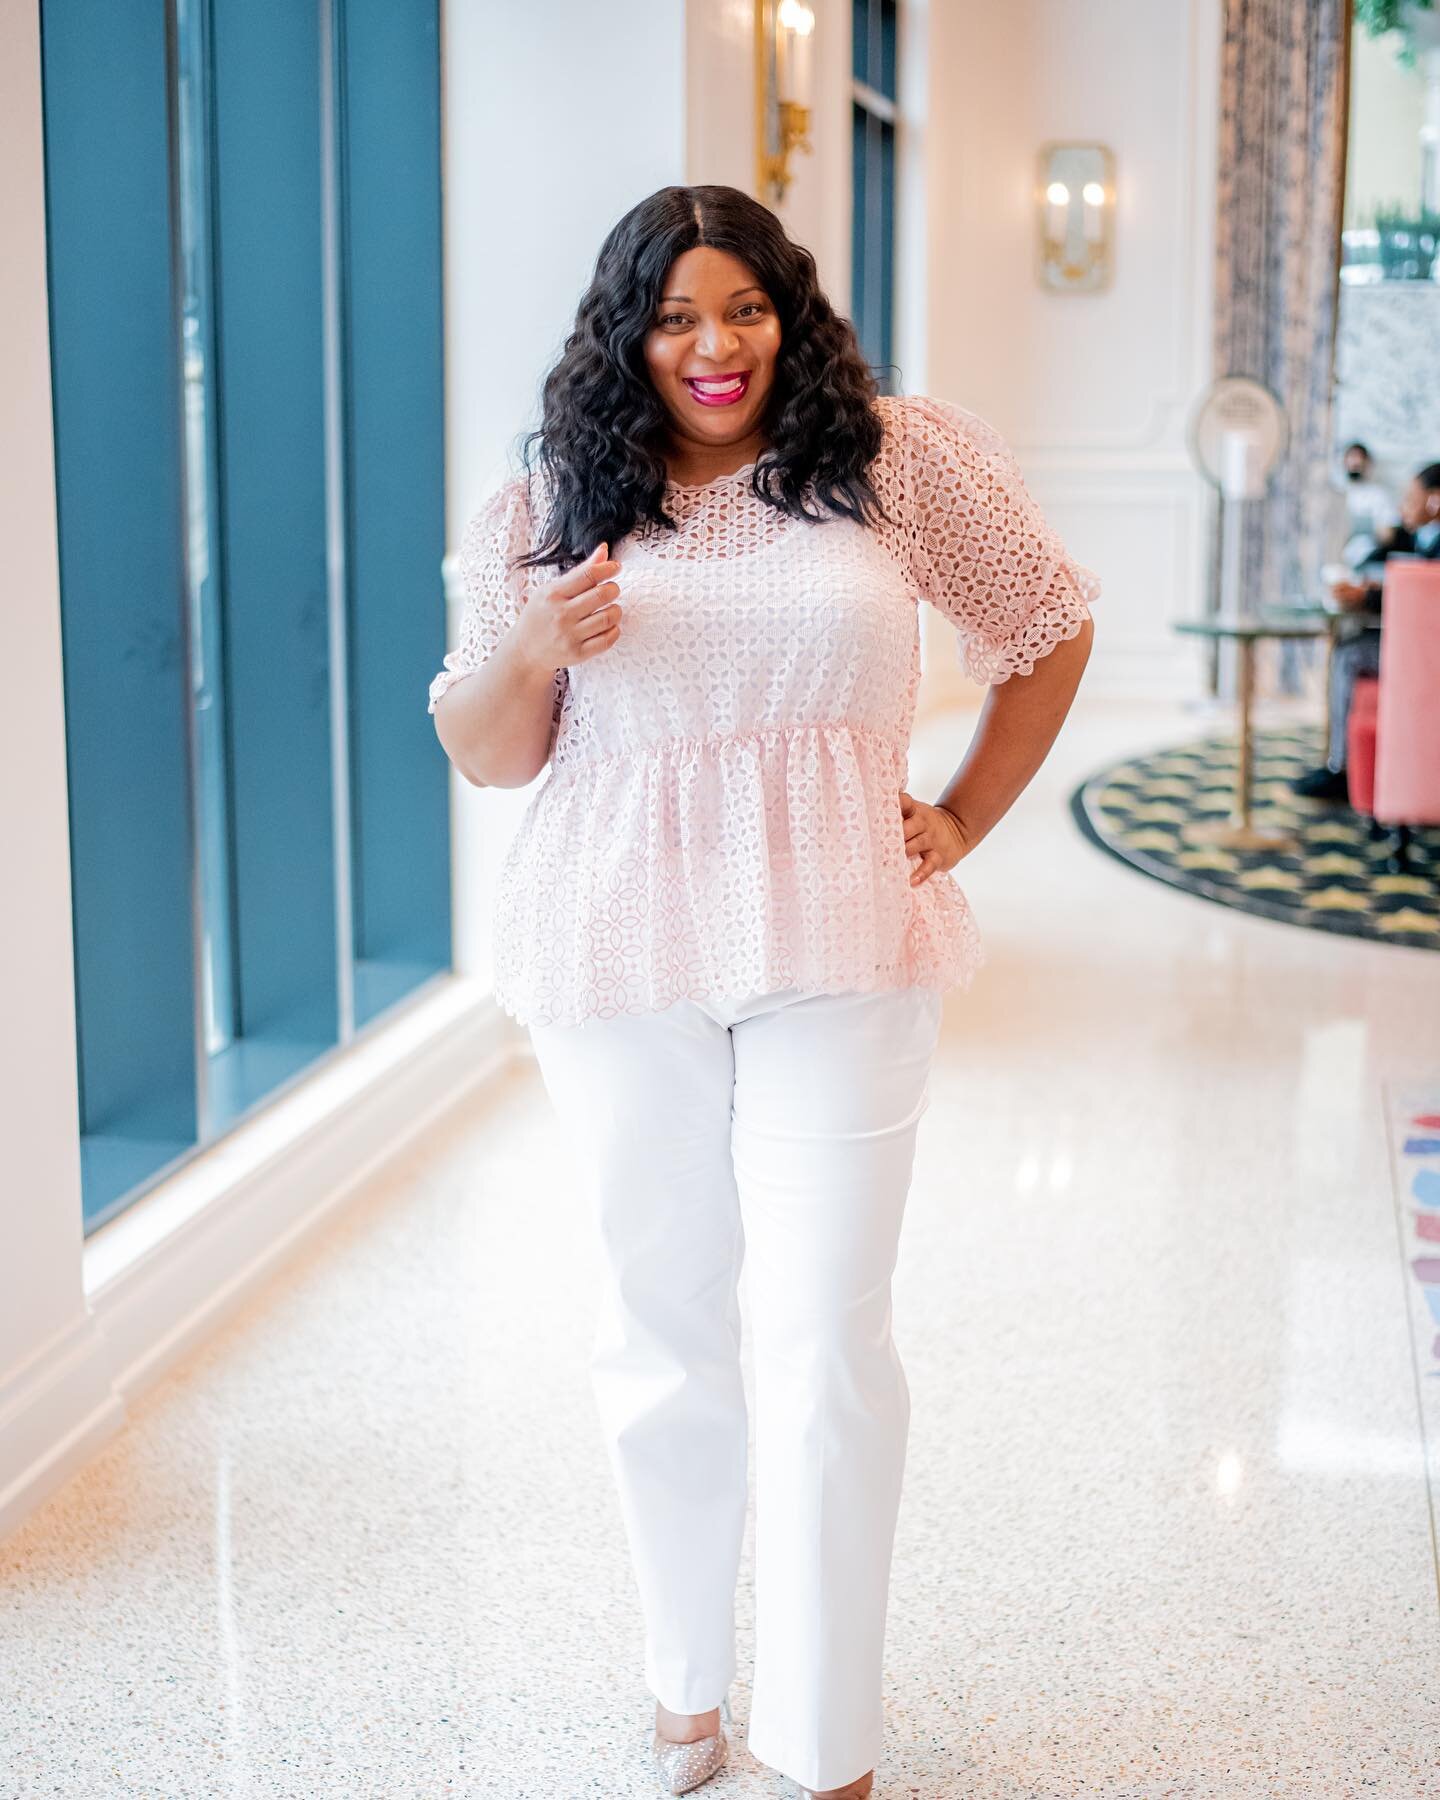 On Wednesday's we wear pink and peplum. When peplum first hit the scene there wasn&rsquo;t a piece of peplum I didn't love. I wore it so much I had to give it a break. #sponsored 

But when I saw this peplum top on @catofashions website, I couldn't r